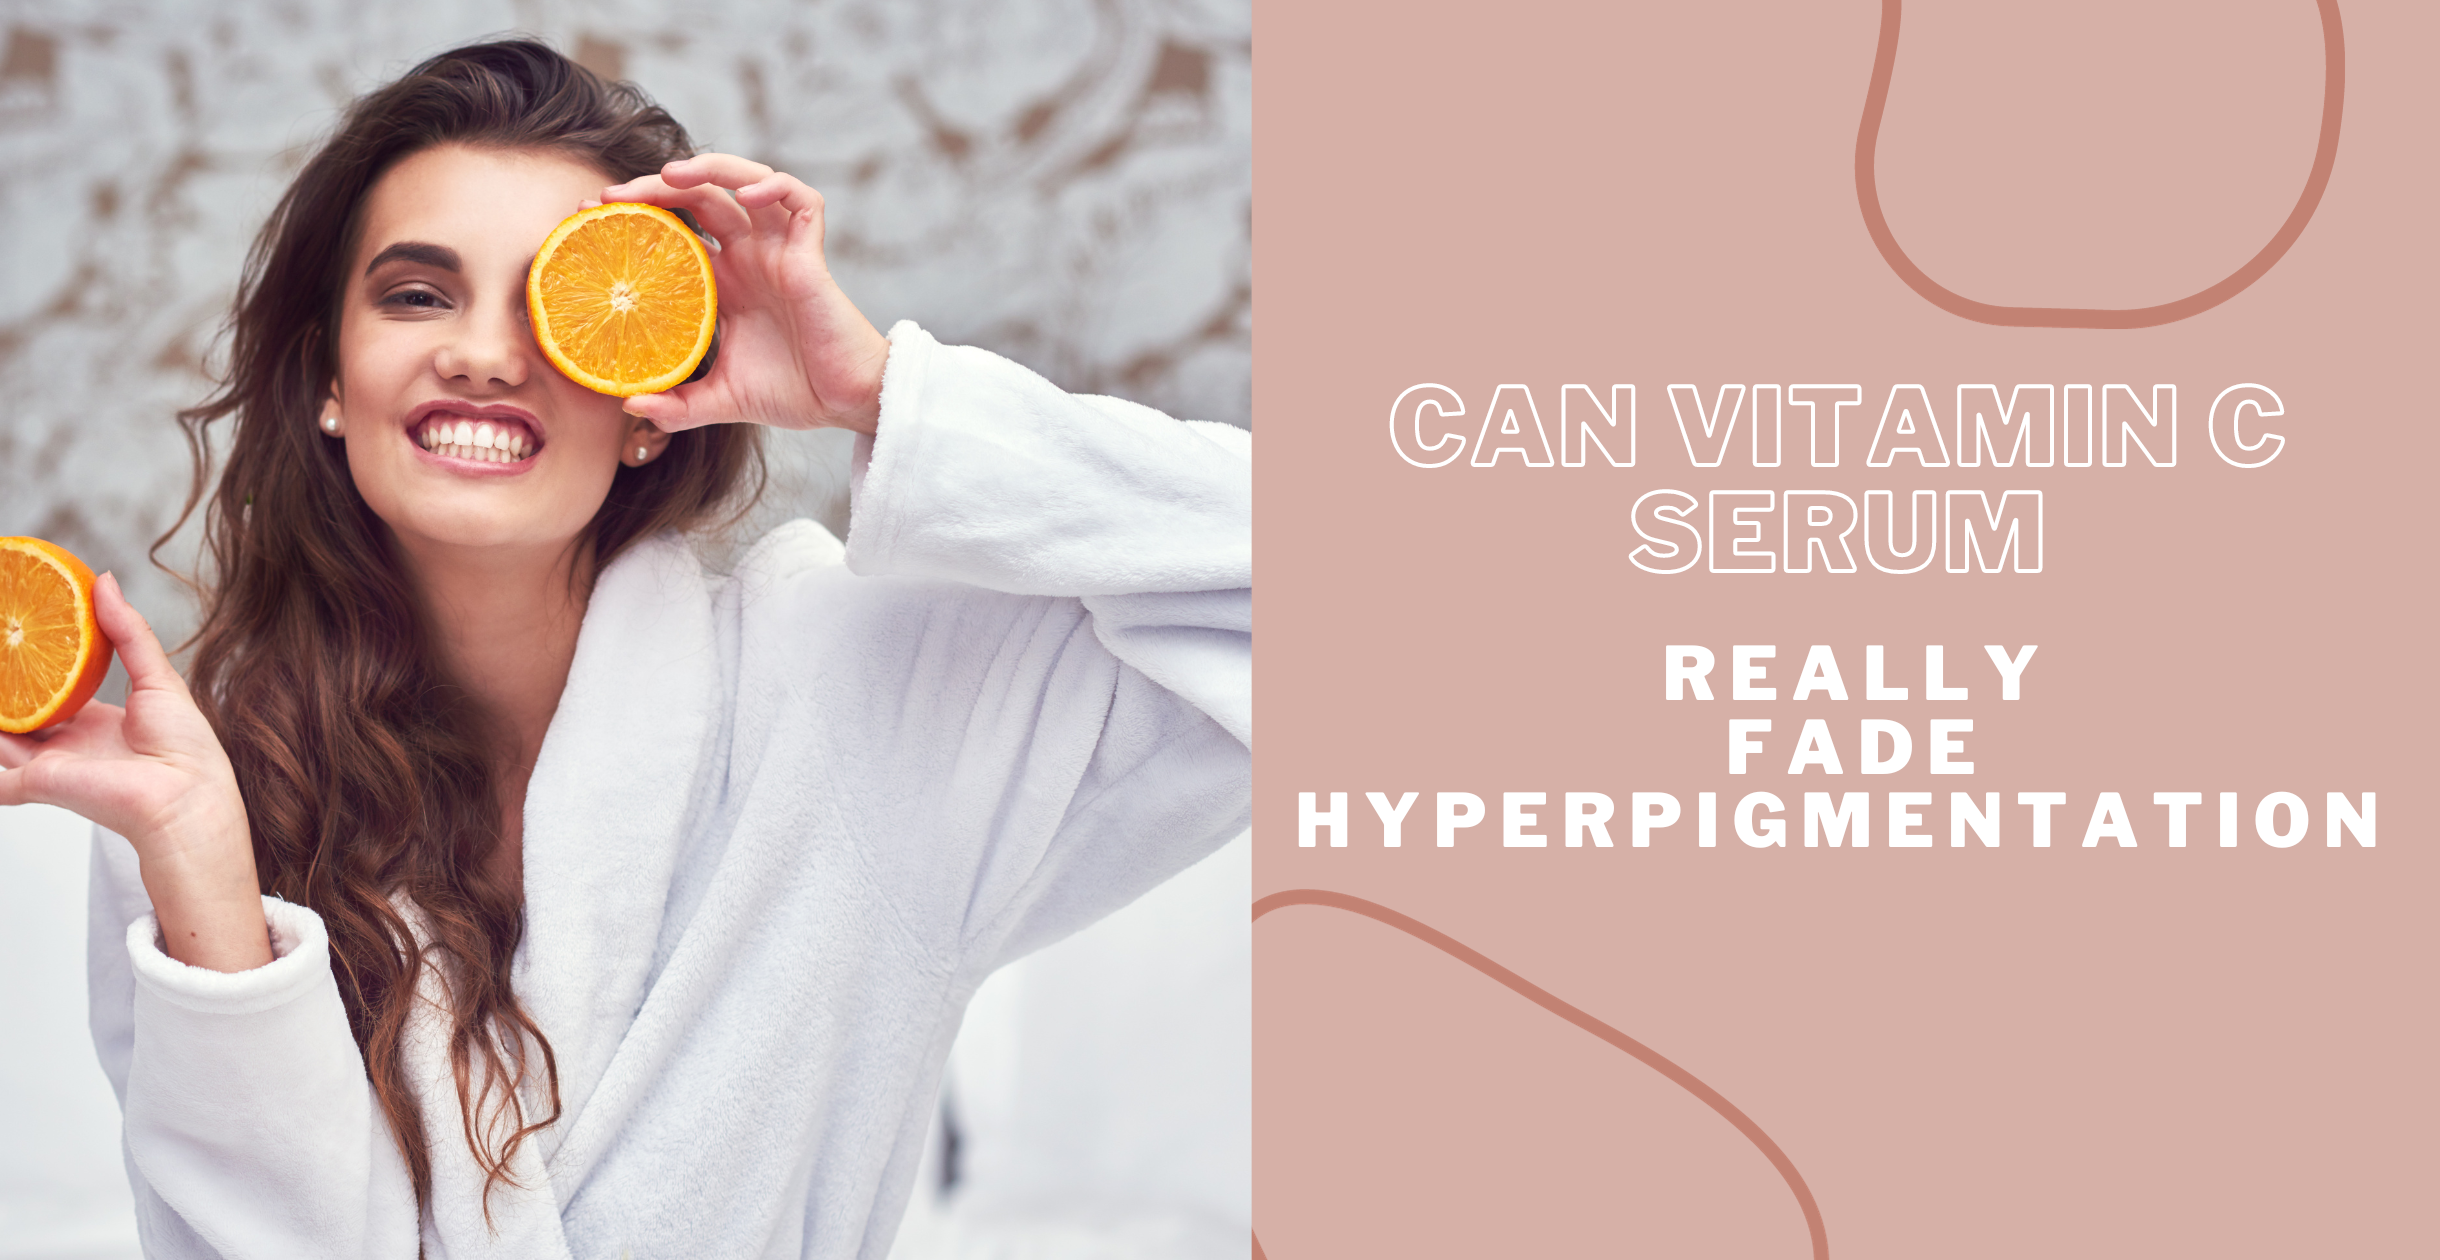 Can Vitamin C Serum Really Fade Hyperpigmentation and Even Out Skin Tone?